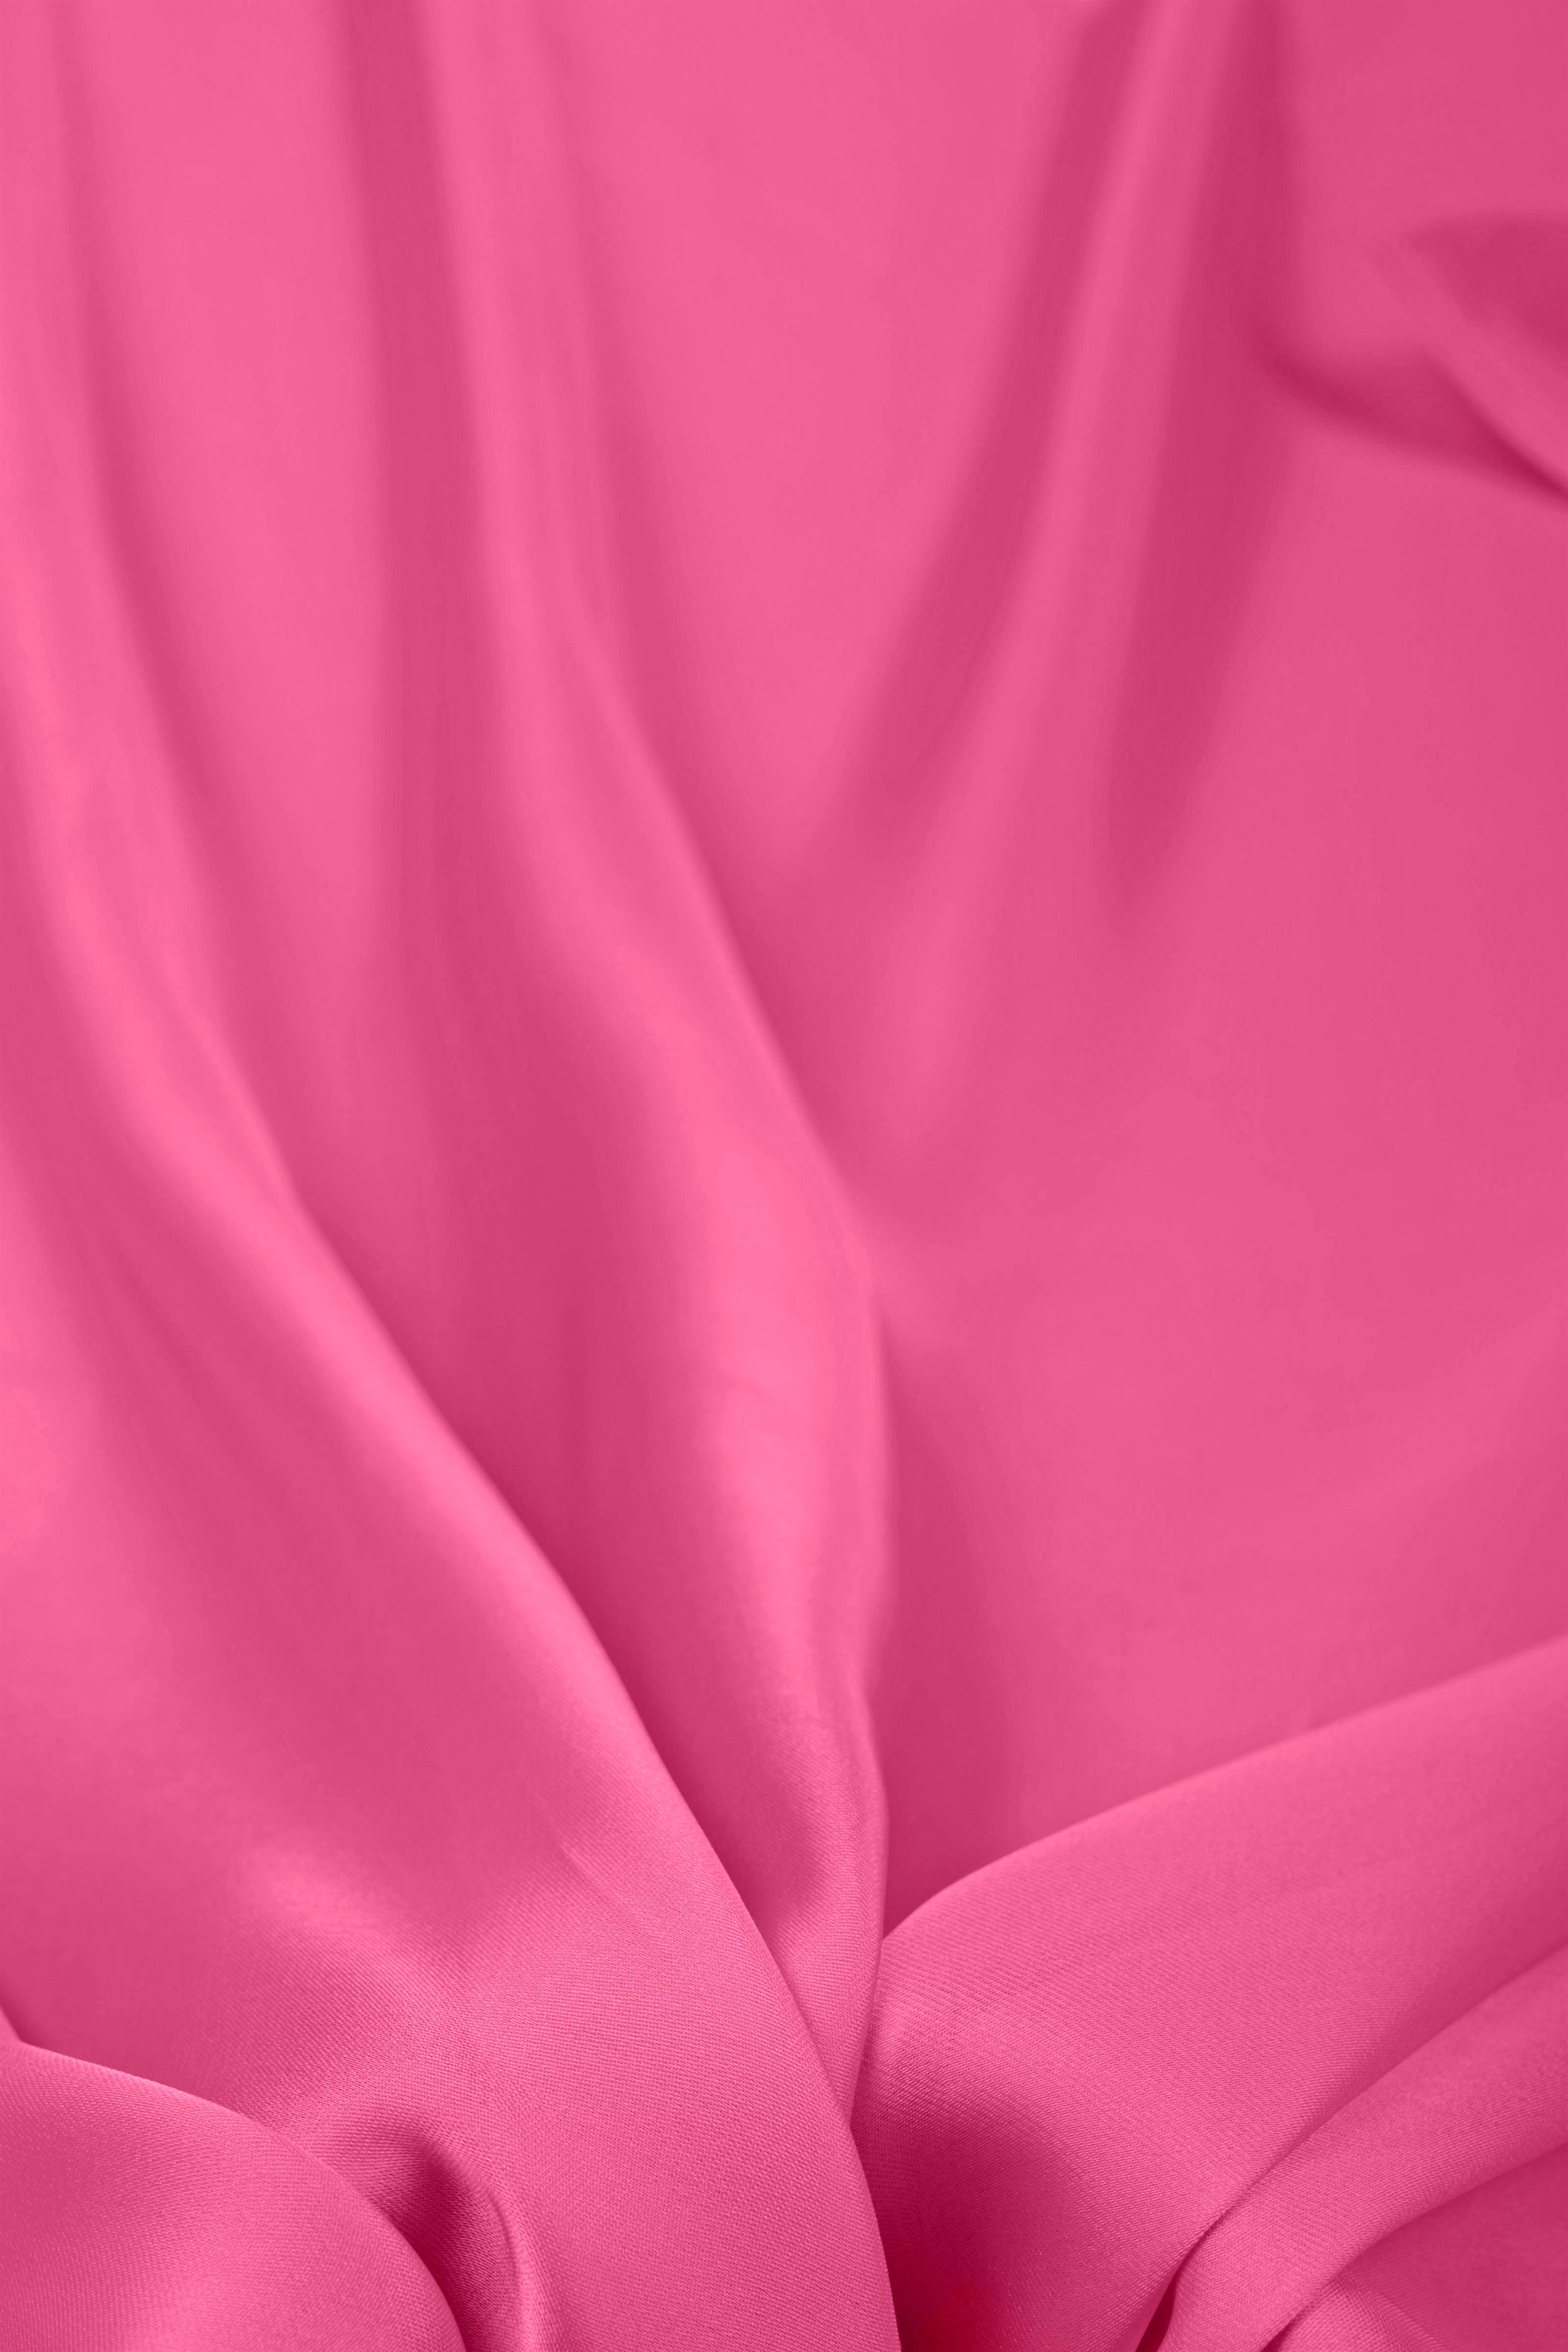 Hot Pink Plain Dyed Satin Georgette Fabric